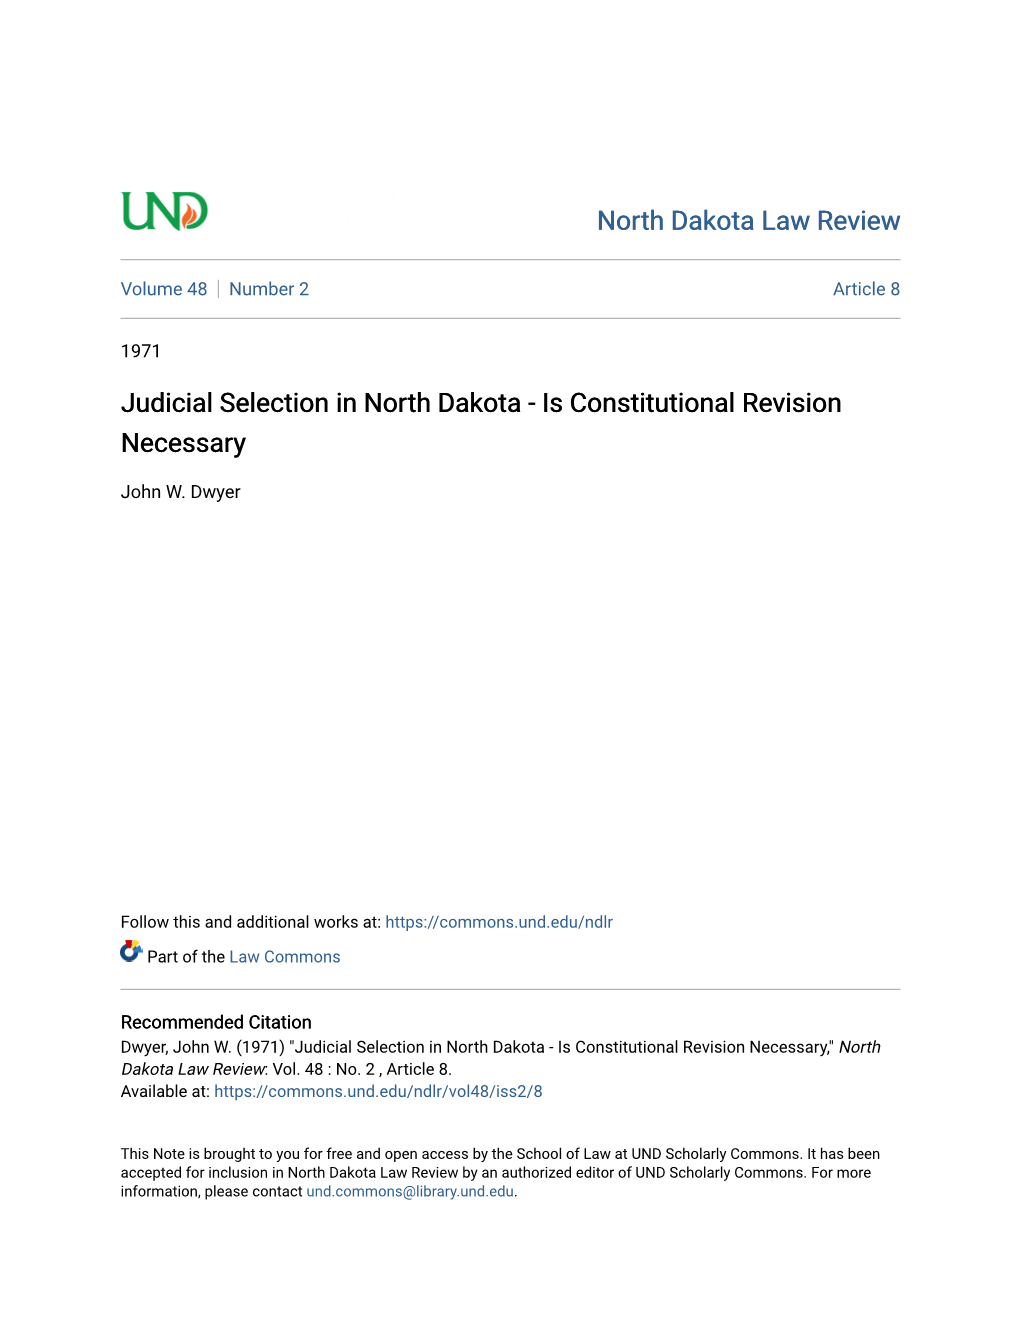 Judicial Selection in North Dakota - Is Constitutional Revision Necessary